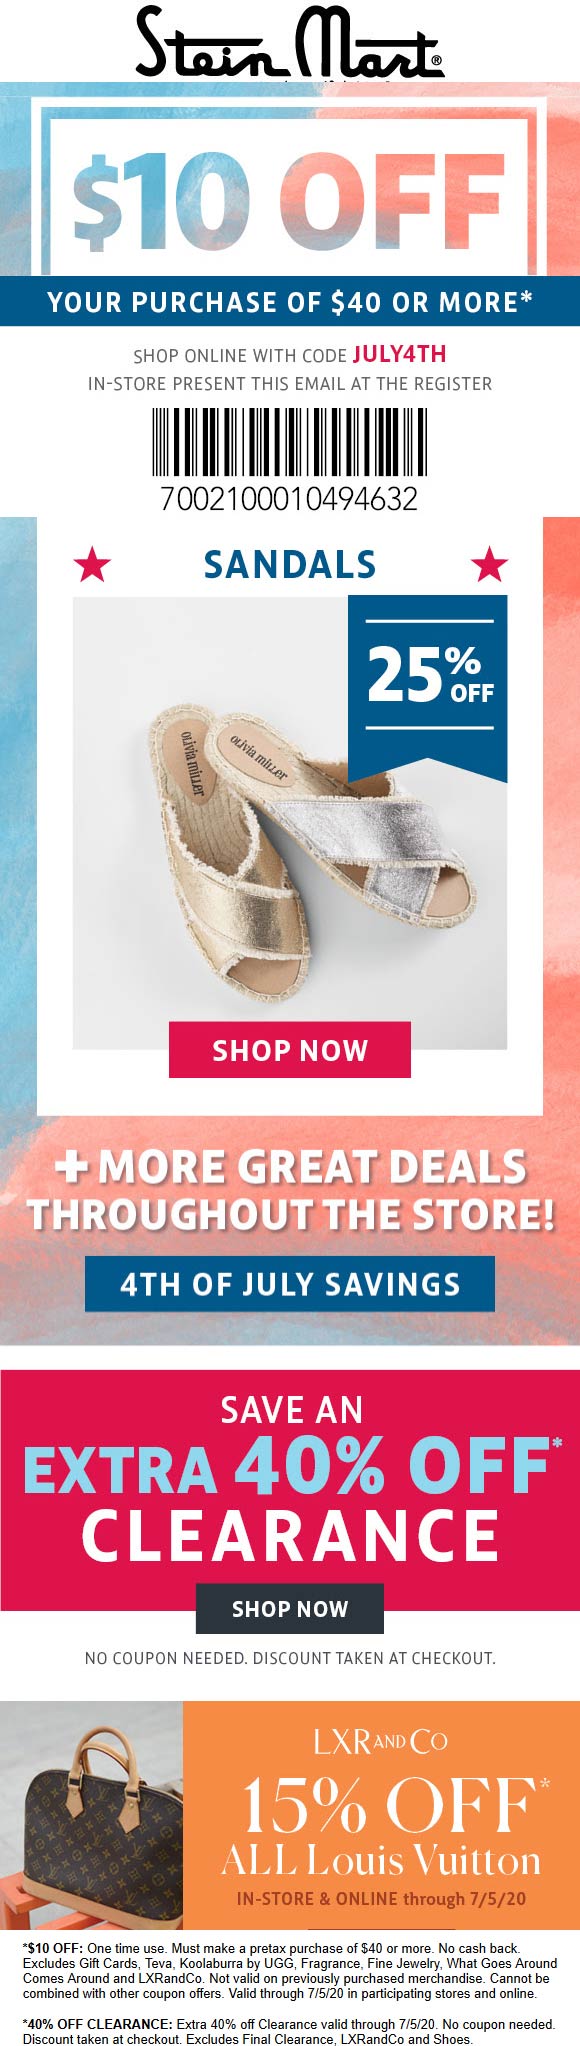 Stein Mart stores Coupon  $10 off $40 at Stein Mart, or online via promo code JULY4TH #steinmart